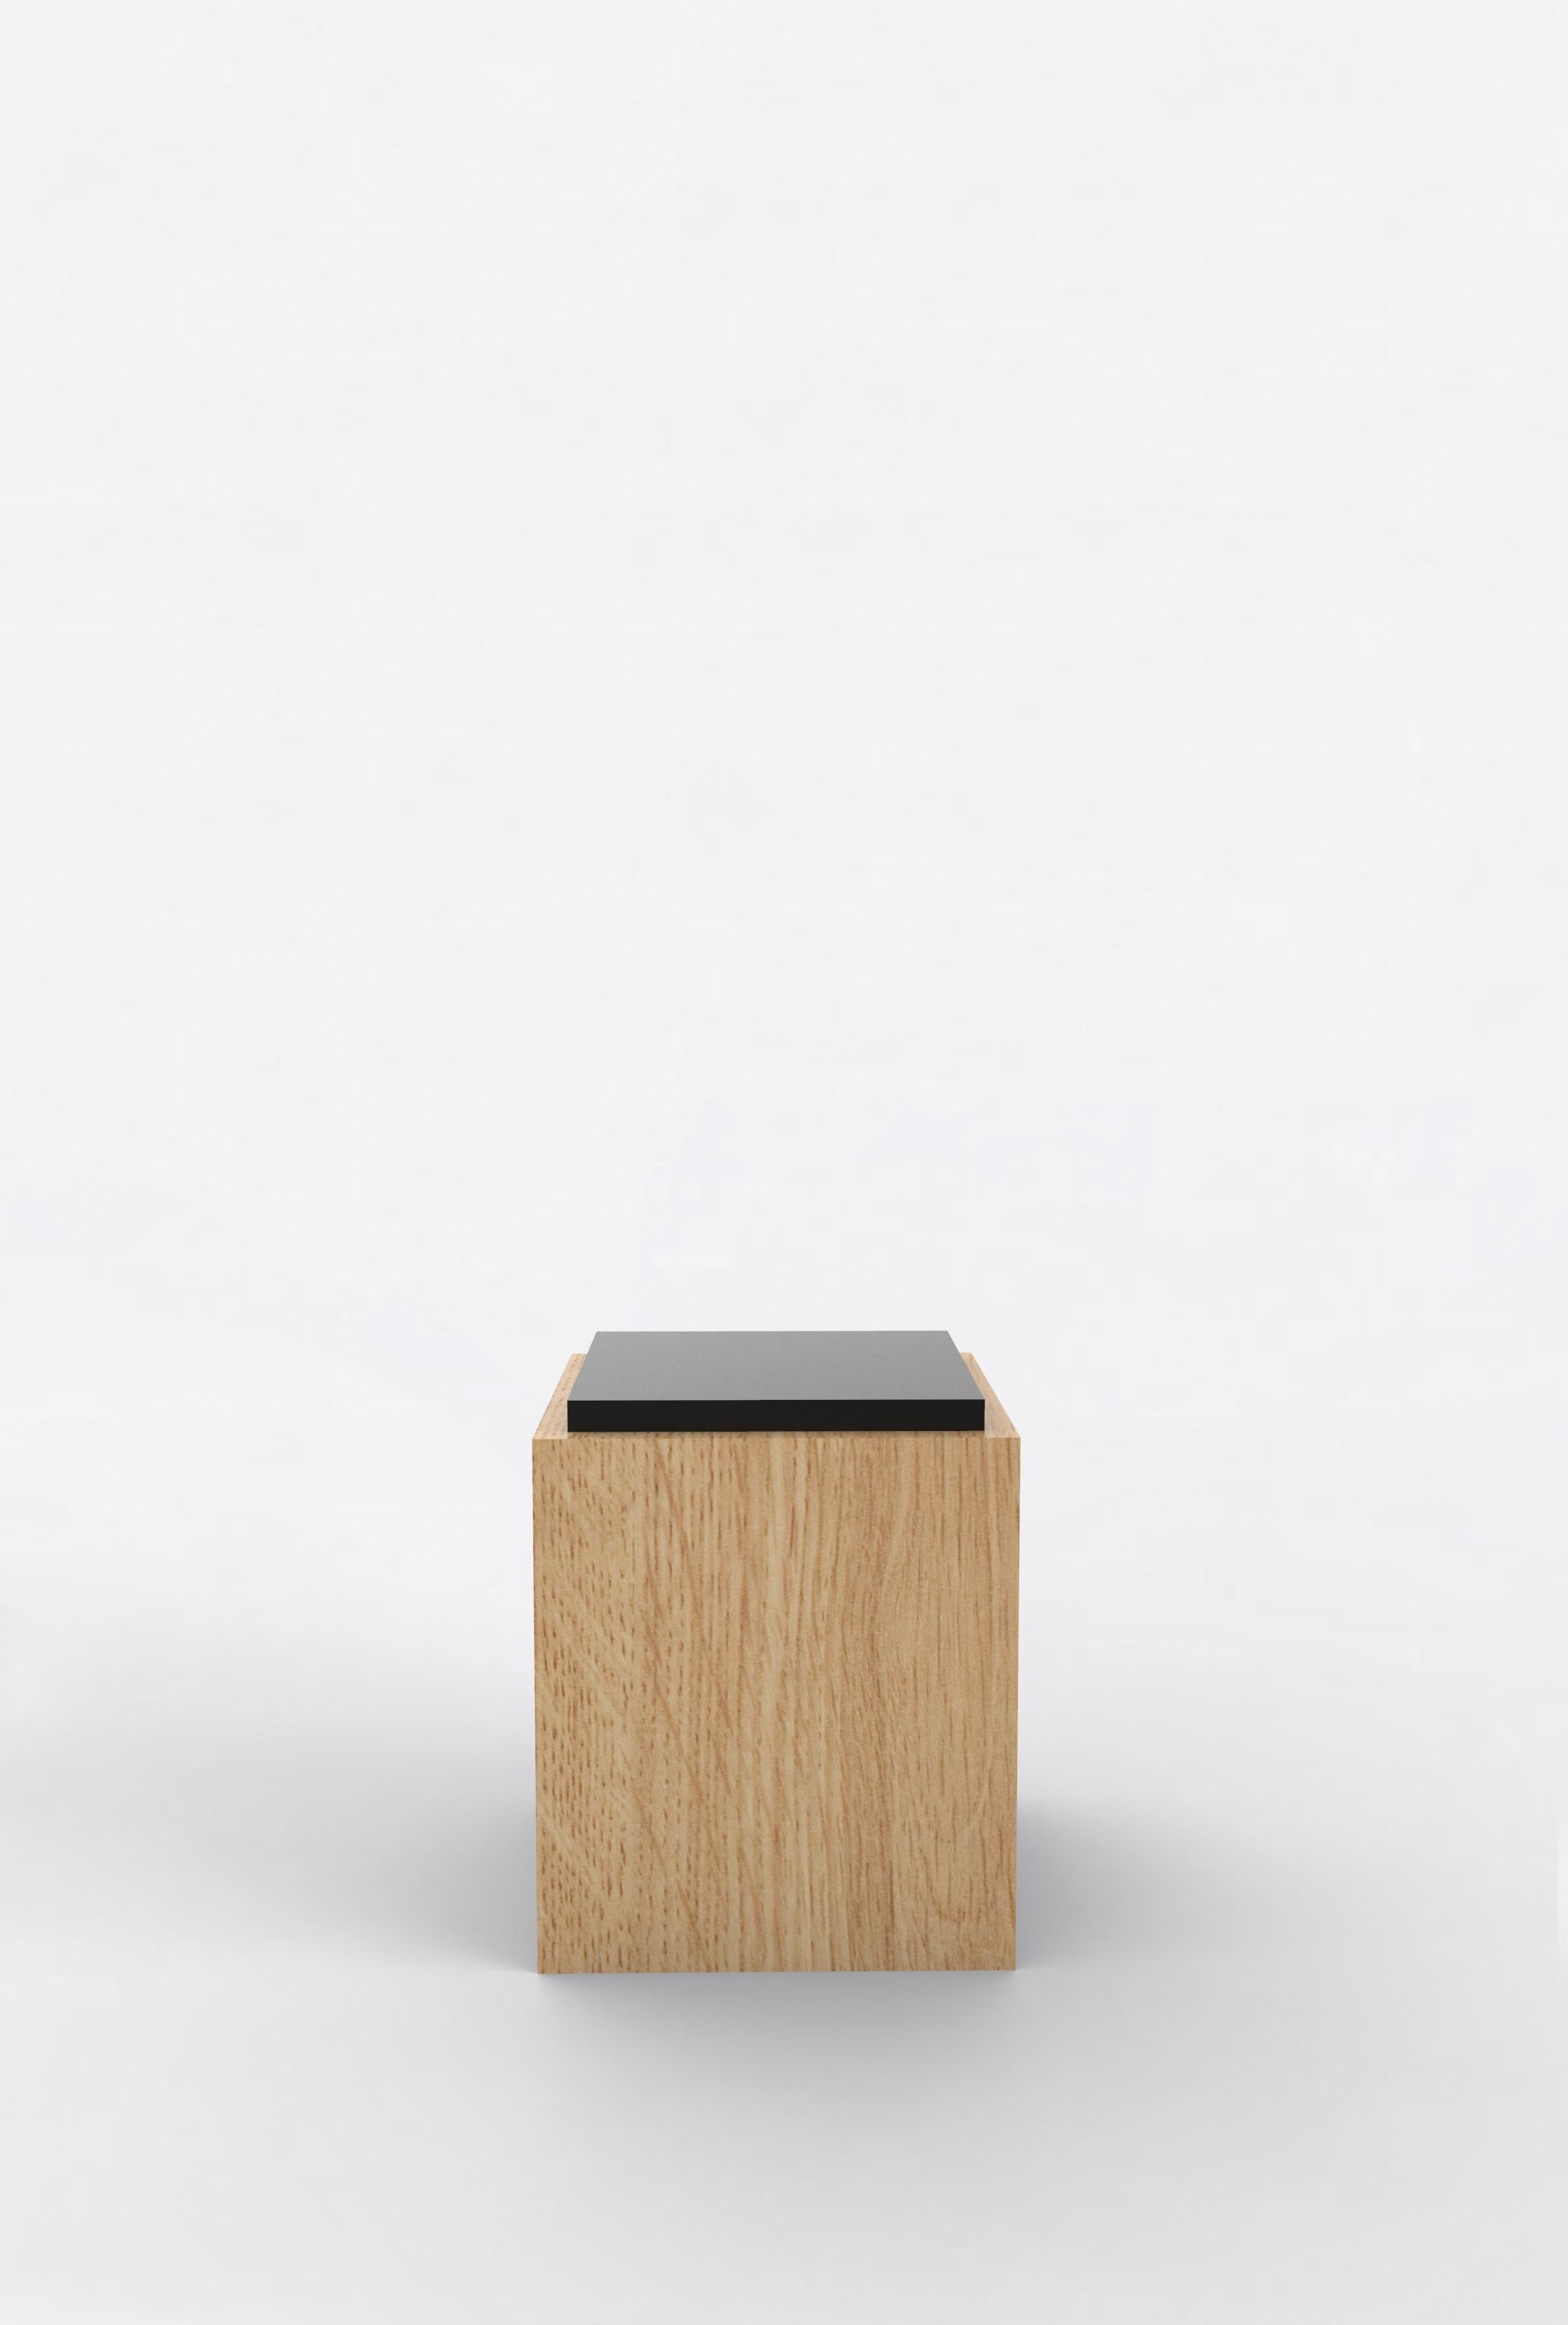 Orphan work 103 side table
Shown in oak and black
Available in natural oak with painted top
Measures: 15” W x 15” D x 18” H

Orphan work is designed to complement in the heart of Soho, New York City. Each piece is handmade in New York and Los